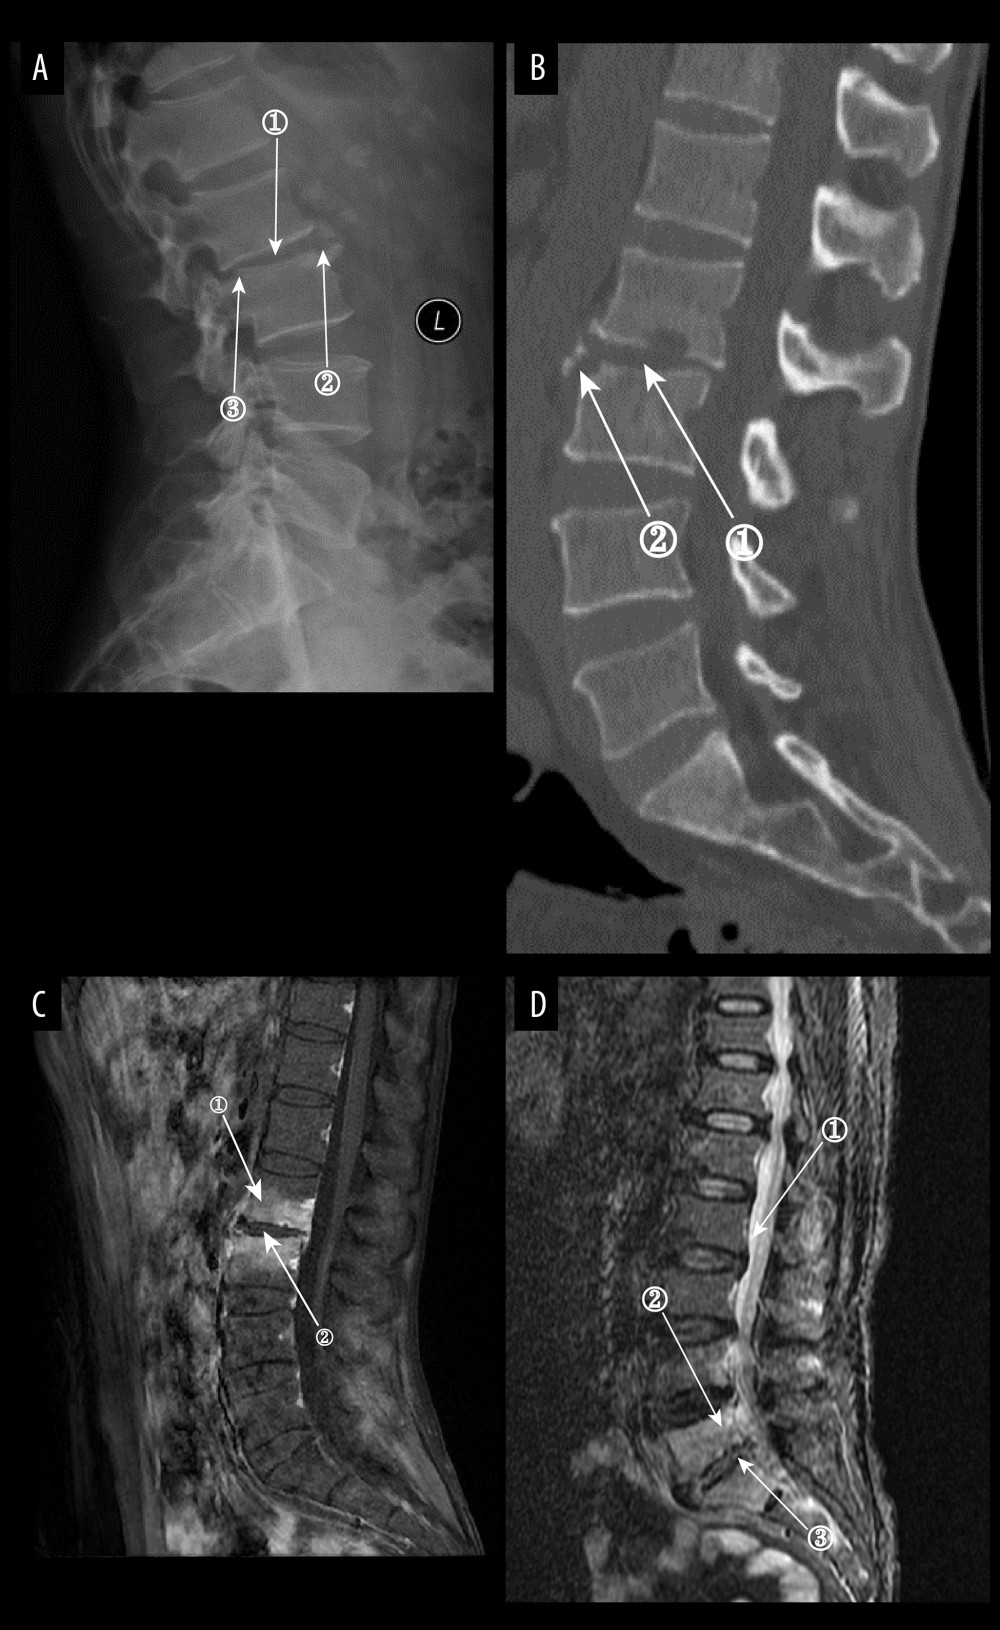 (A) Plain radiographs of late Borrelia burgdorferi spondylitis (BS). Marker 1 shows a decrease in the height of the intervertebral space, marker 2 shows osteophytes on the margins of the vertebral body, and marker 3 shows a slight forward displacement of the L3 vertebral body. (A–D) Images of the same patient, with an interval of approximately 120 days between the onset of symptoms and the time of the radiograph. (B) Plain computed tomography in late BS. In both figures, Marker 1 shows a decrease in the height of the intervertebral space, and marker 2 shows hyperplasia of the anterior margin of the vertebrae. (C) Magnetic resonance imaging (MRI) of late BS. This image is a T1-enhanced image showing abnormal signal in the vertebral body at marker 1 and reduced intervertebral space height in the vertebral body at marker. (D) MRI of late BS. Density at marker 1 is 54, marker 2 shows diffuse infection of the vertebral body with a density of 37, and marker 3 shows an infected disc. The time between the onset of this patient’s disease and the radiograph is about 2 years. (ITK-SNAP. Version 4.0.2. Paul Yushkevich, Jilei Hao, Alison Pouch, Sadhana Ravikumar et al at the Penn Image Computing and Science Laboratory; Adobe Illustrator 2022. 26.5. Adobe Inc.).